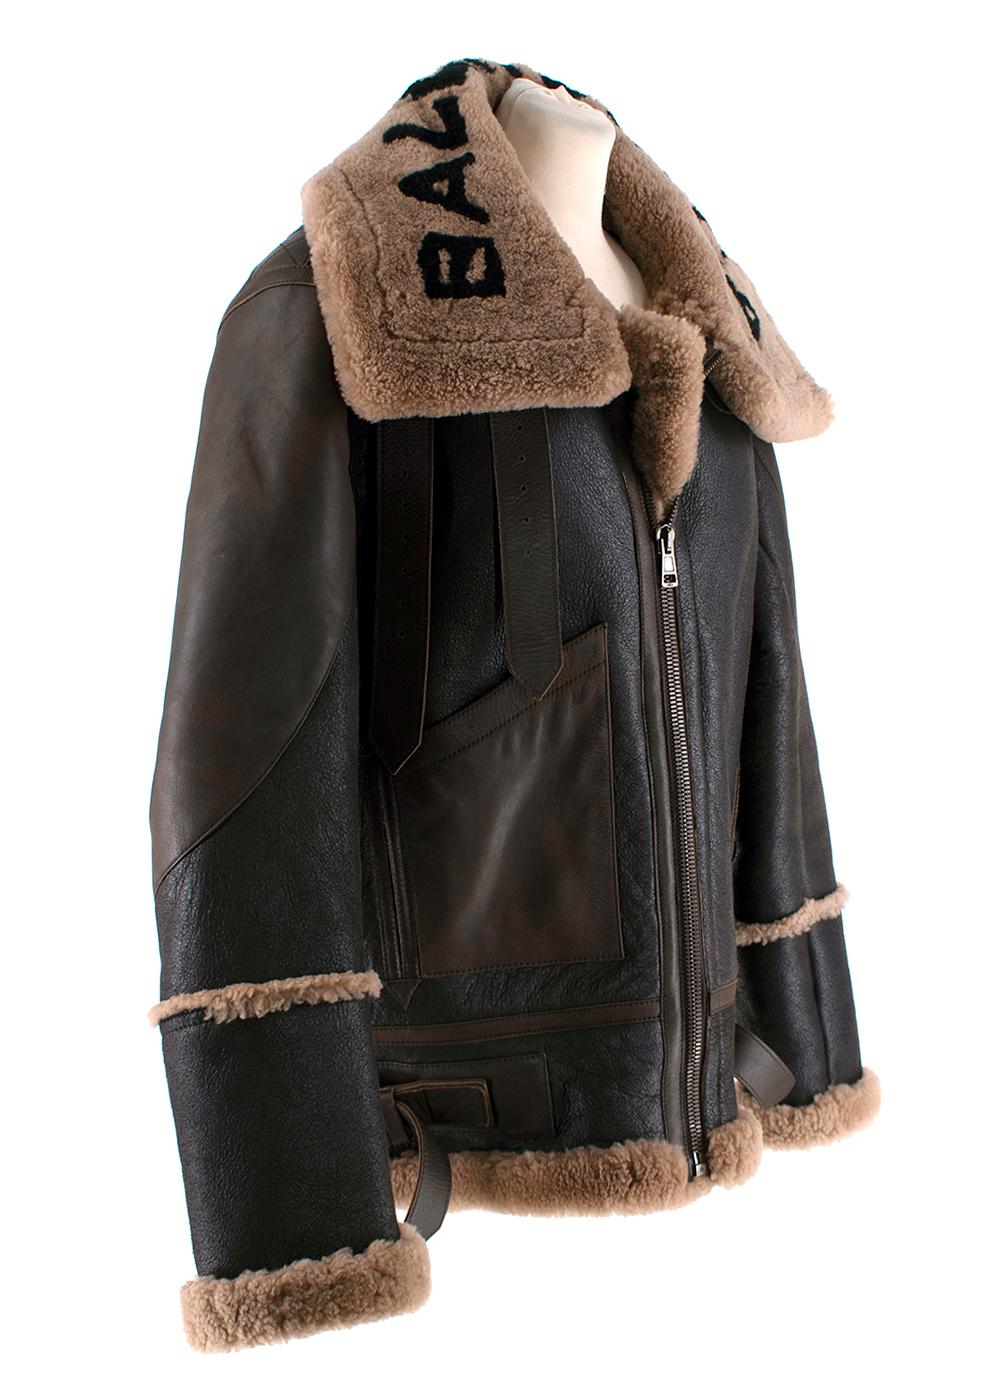 Balenciaga Brown Leather & Shearling Logo Aviator Jacket

- Iconic aviator-style jacket in brown hues
- Cracleque leather exterior with shearling-lined interior and wide lapels 
- Logo in black across the collar
- Front zip closure 
- Front patch